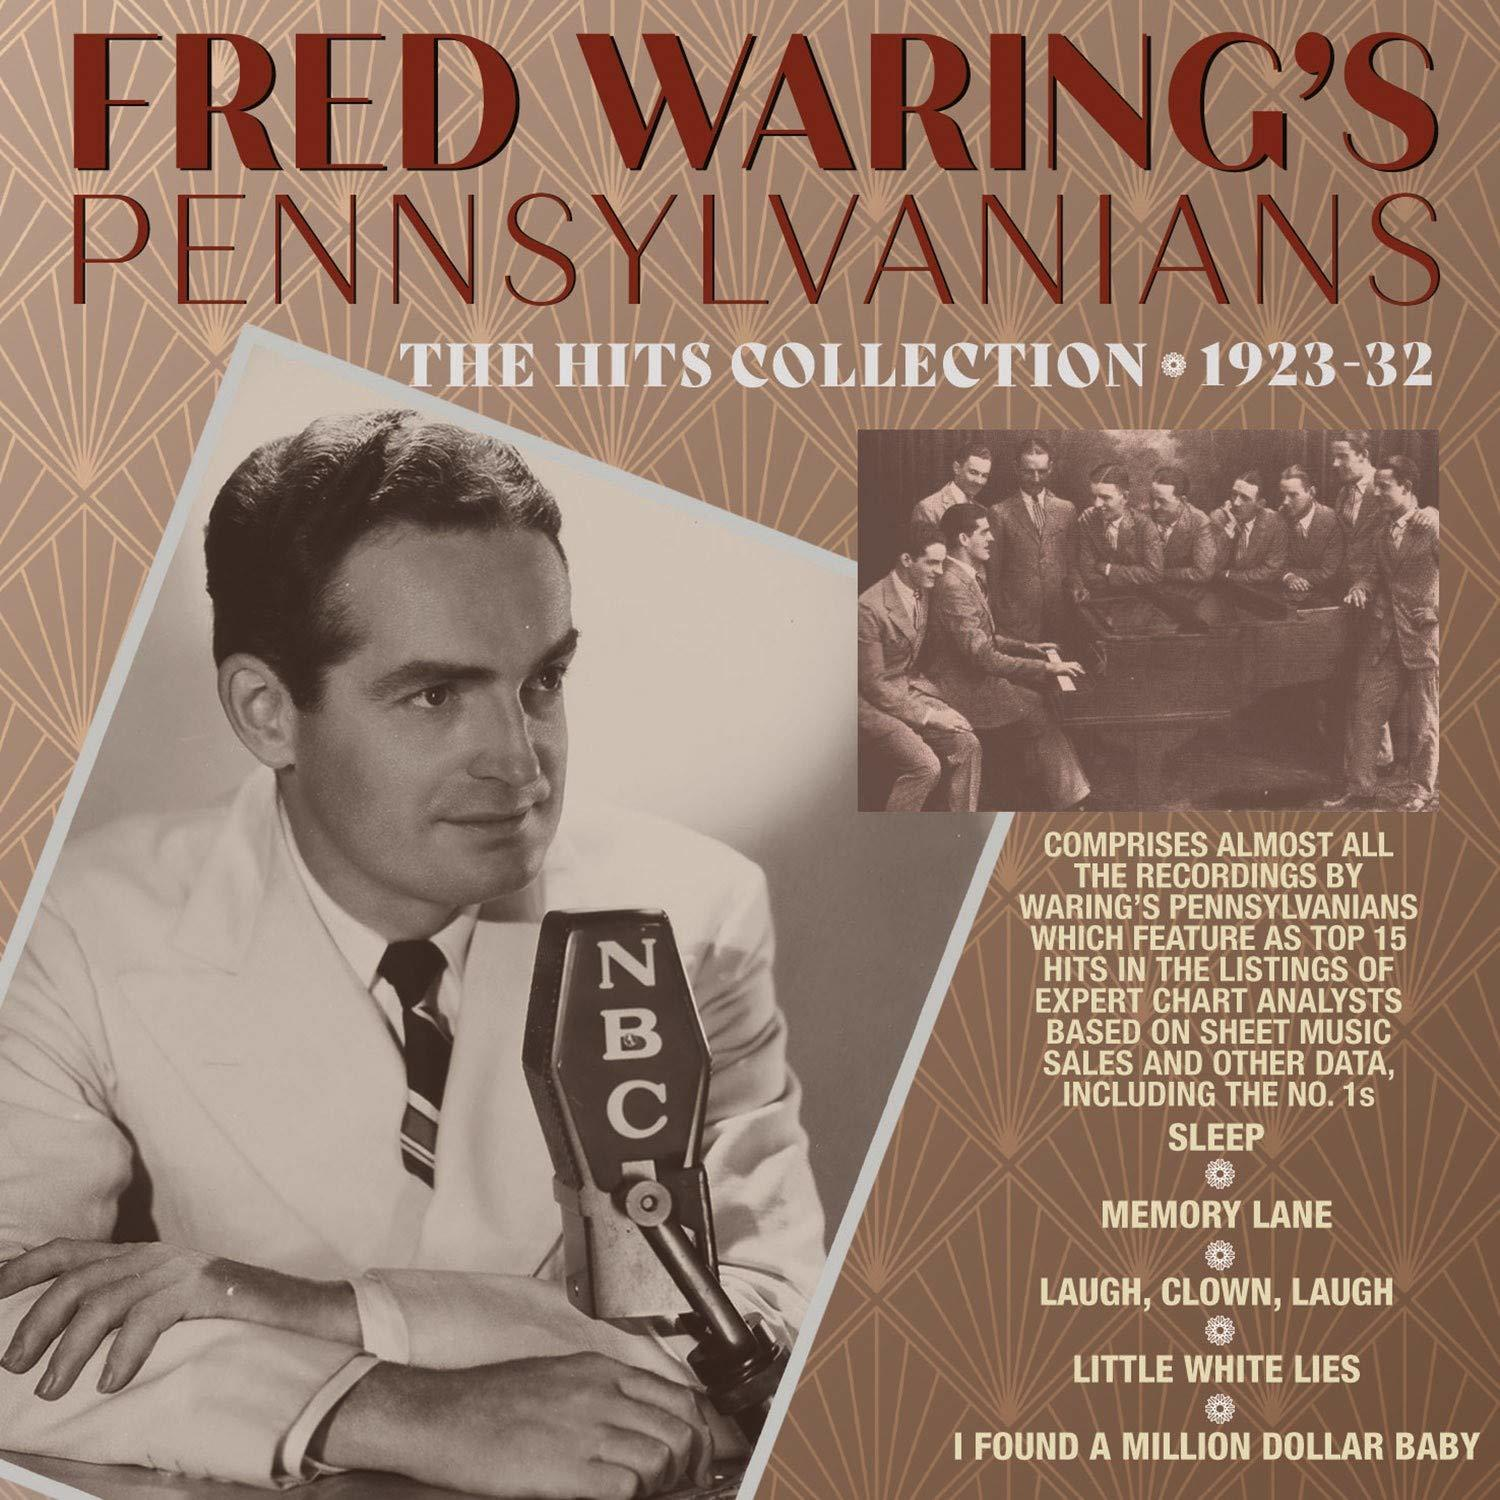 & Pennsylvanians (CD) HITS COLLECTION Fred - 1923-32 Waring The -